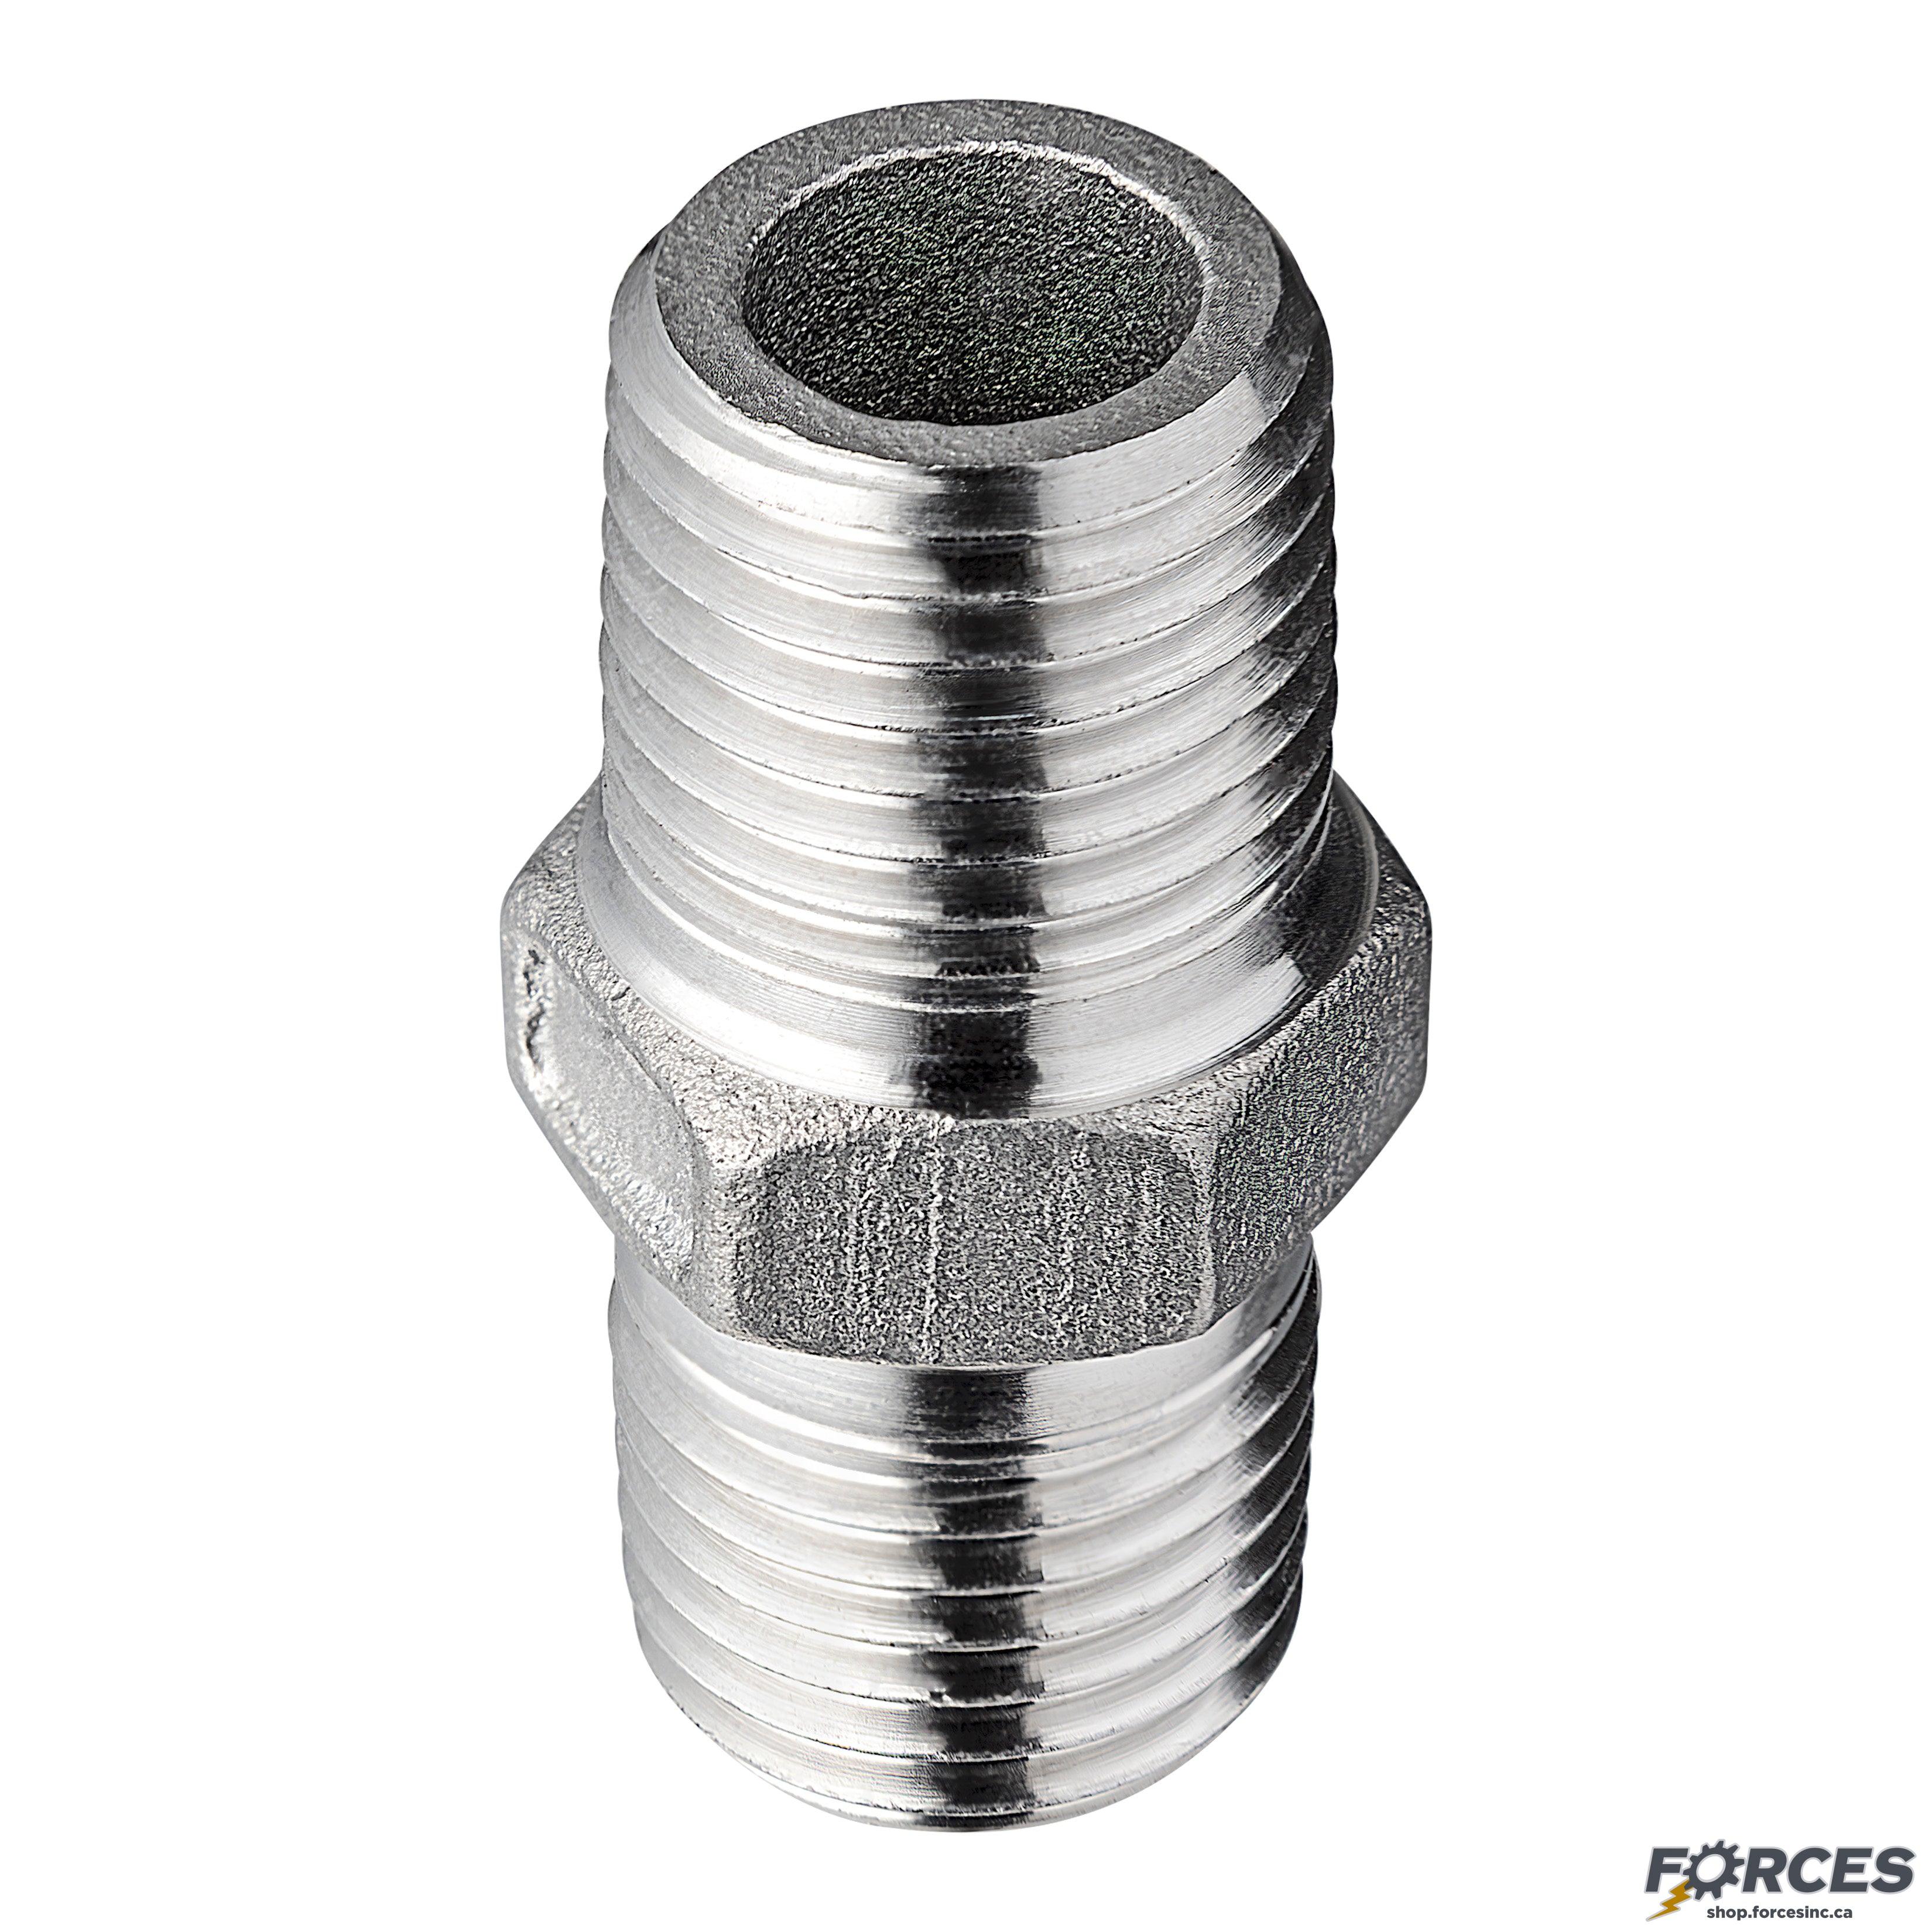 1-1/4" Hex Nipple NPT #150 - Stainless Steel 316 - Forces Inc